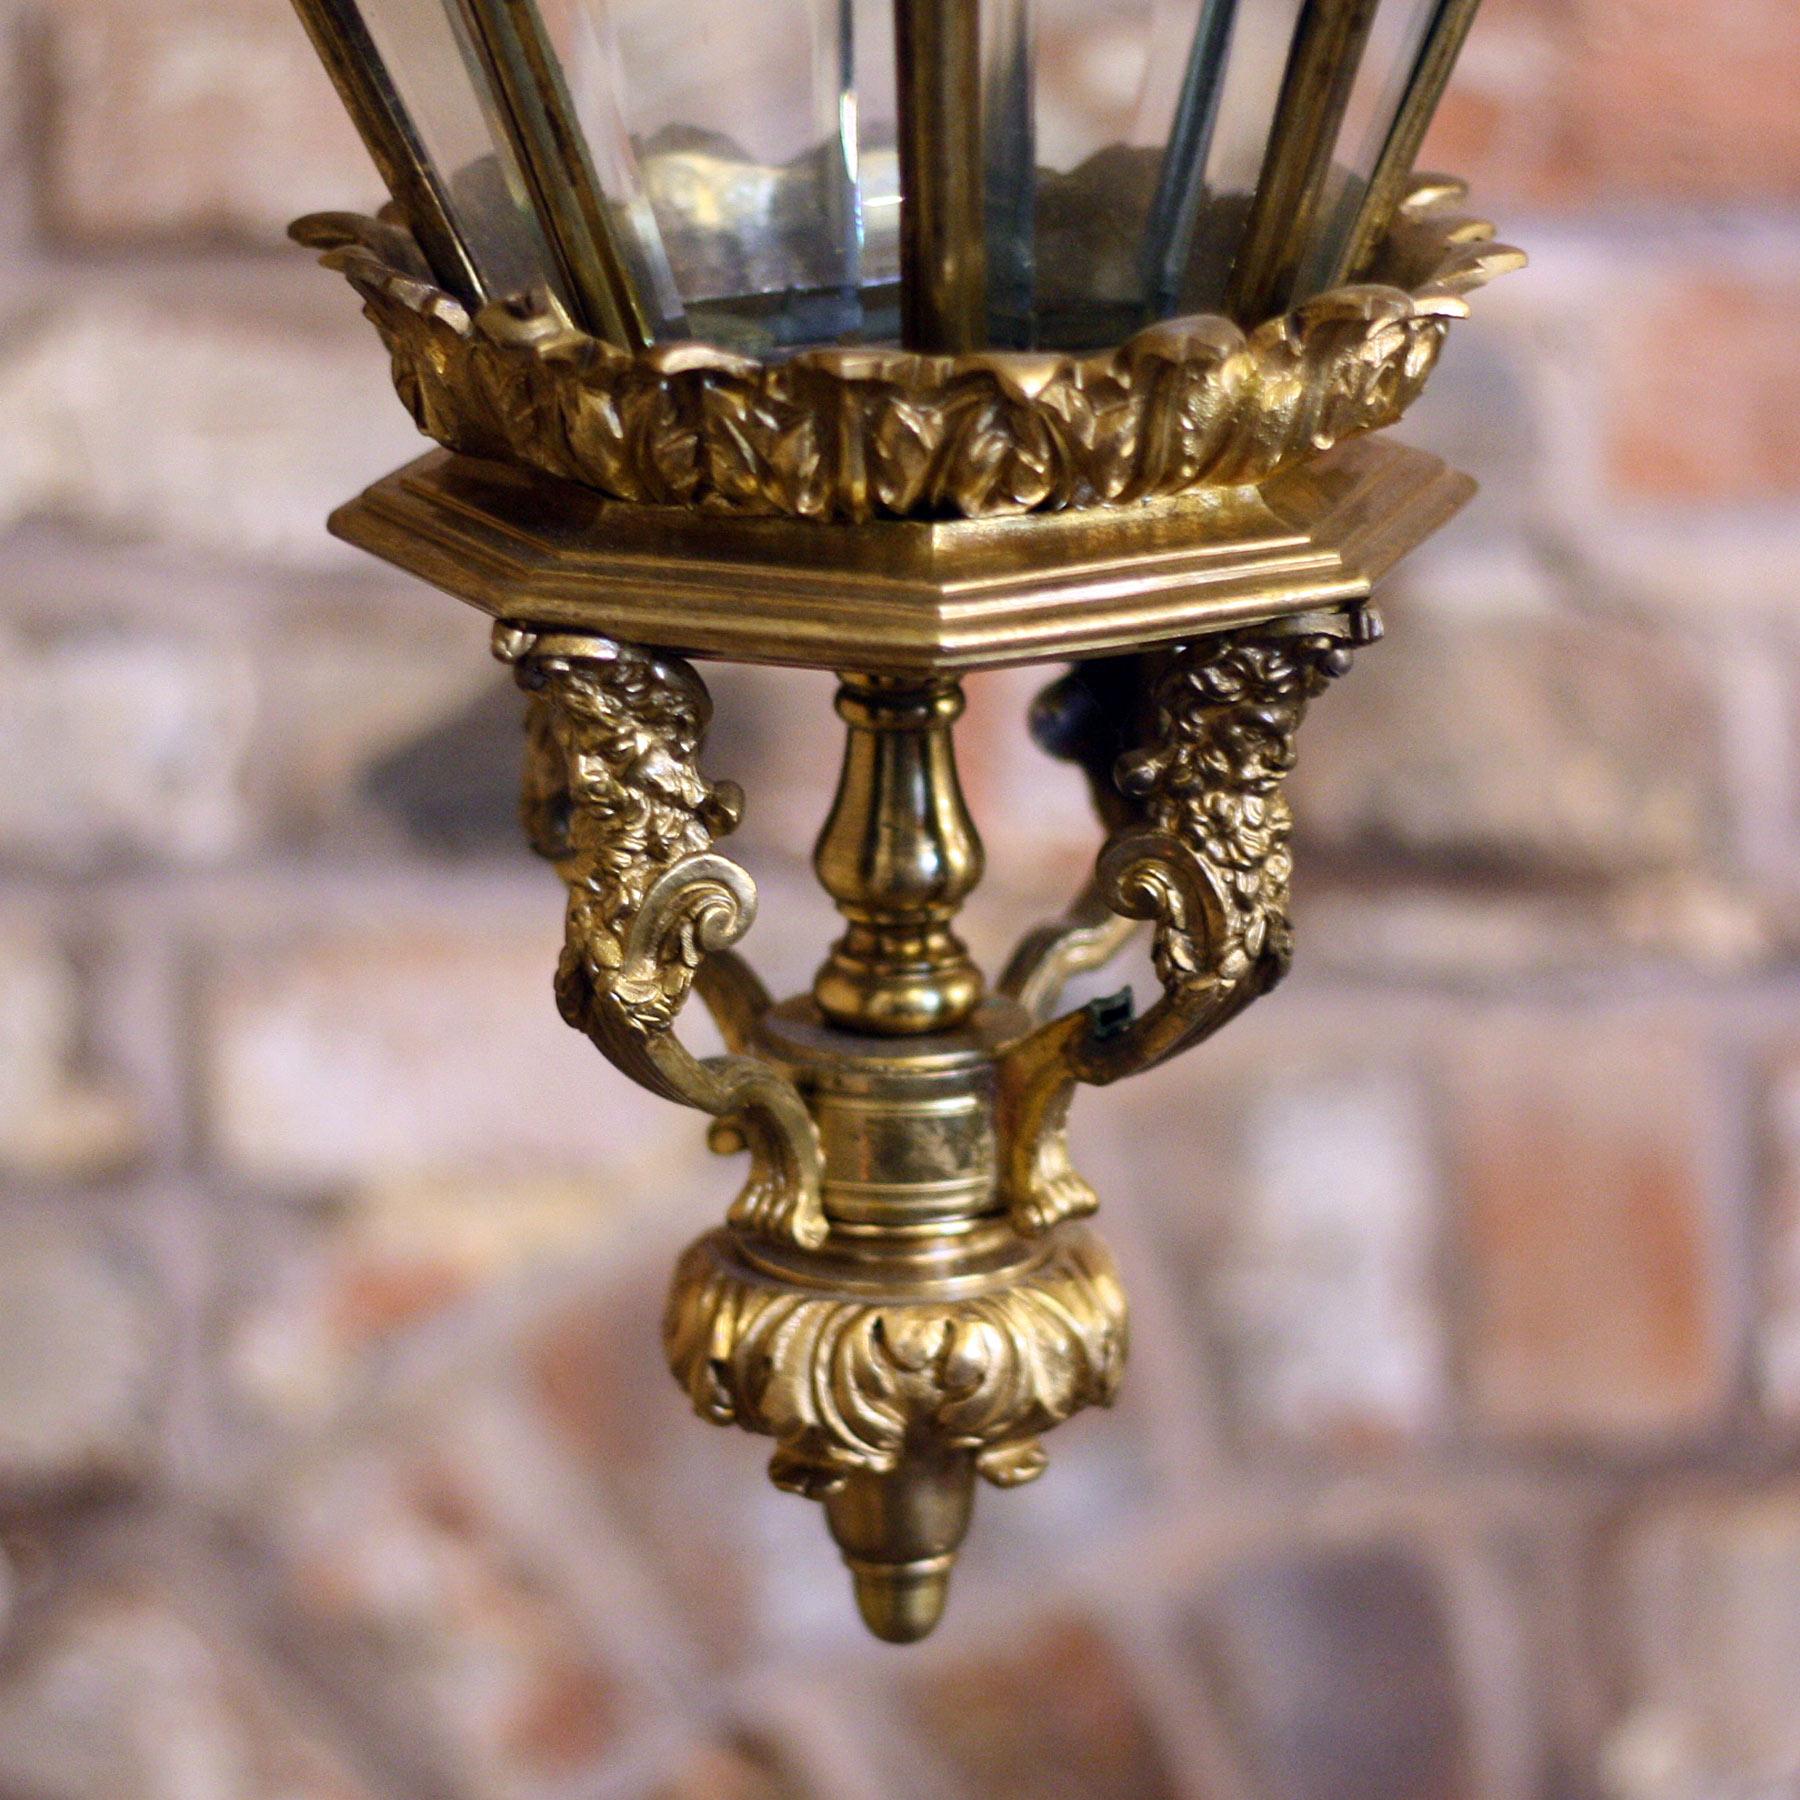 Exceptional 19th century Versailles Antique lantern, all fully restored and with original beveled glass.

The metal work has been polished back to it original glory which really makes every detail stand out. The Royal crown that sits upon the body